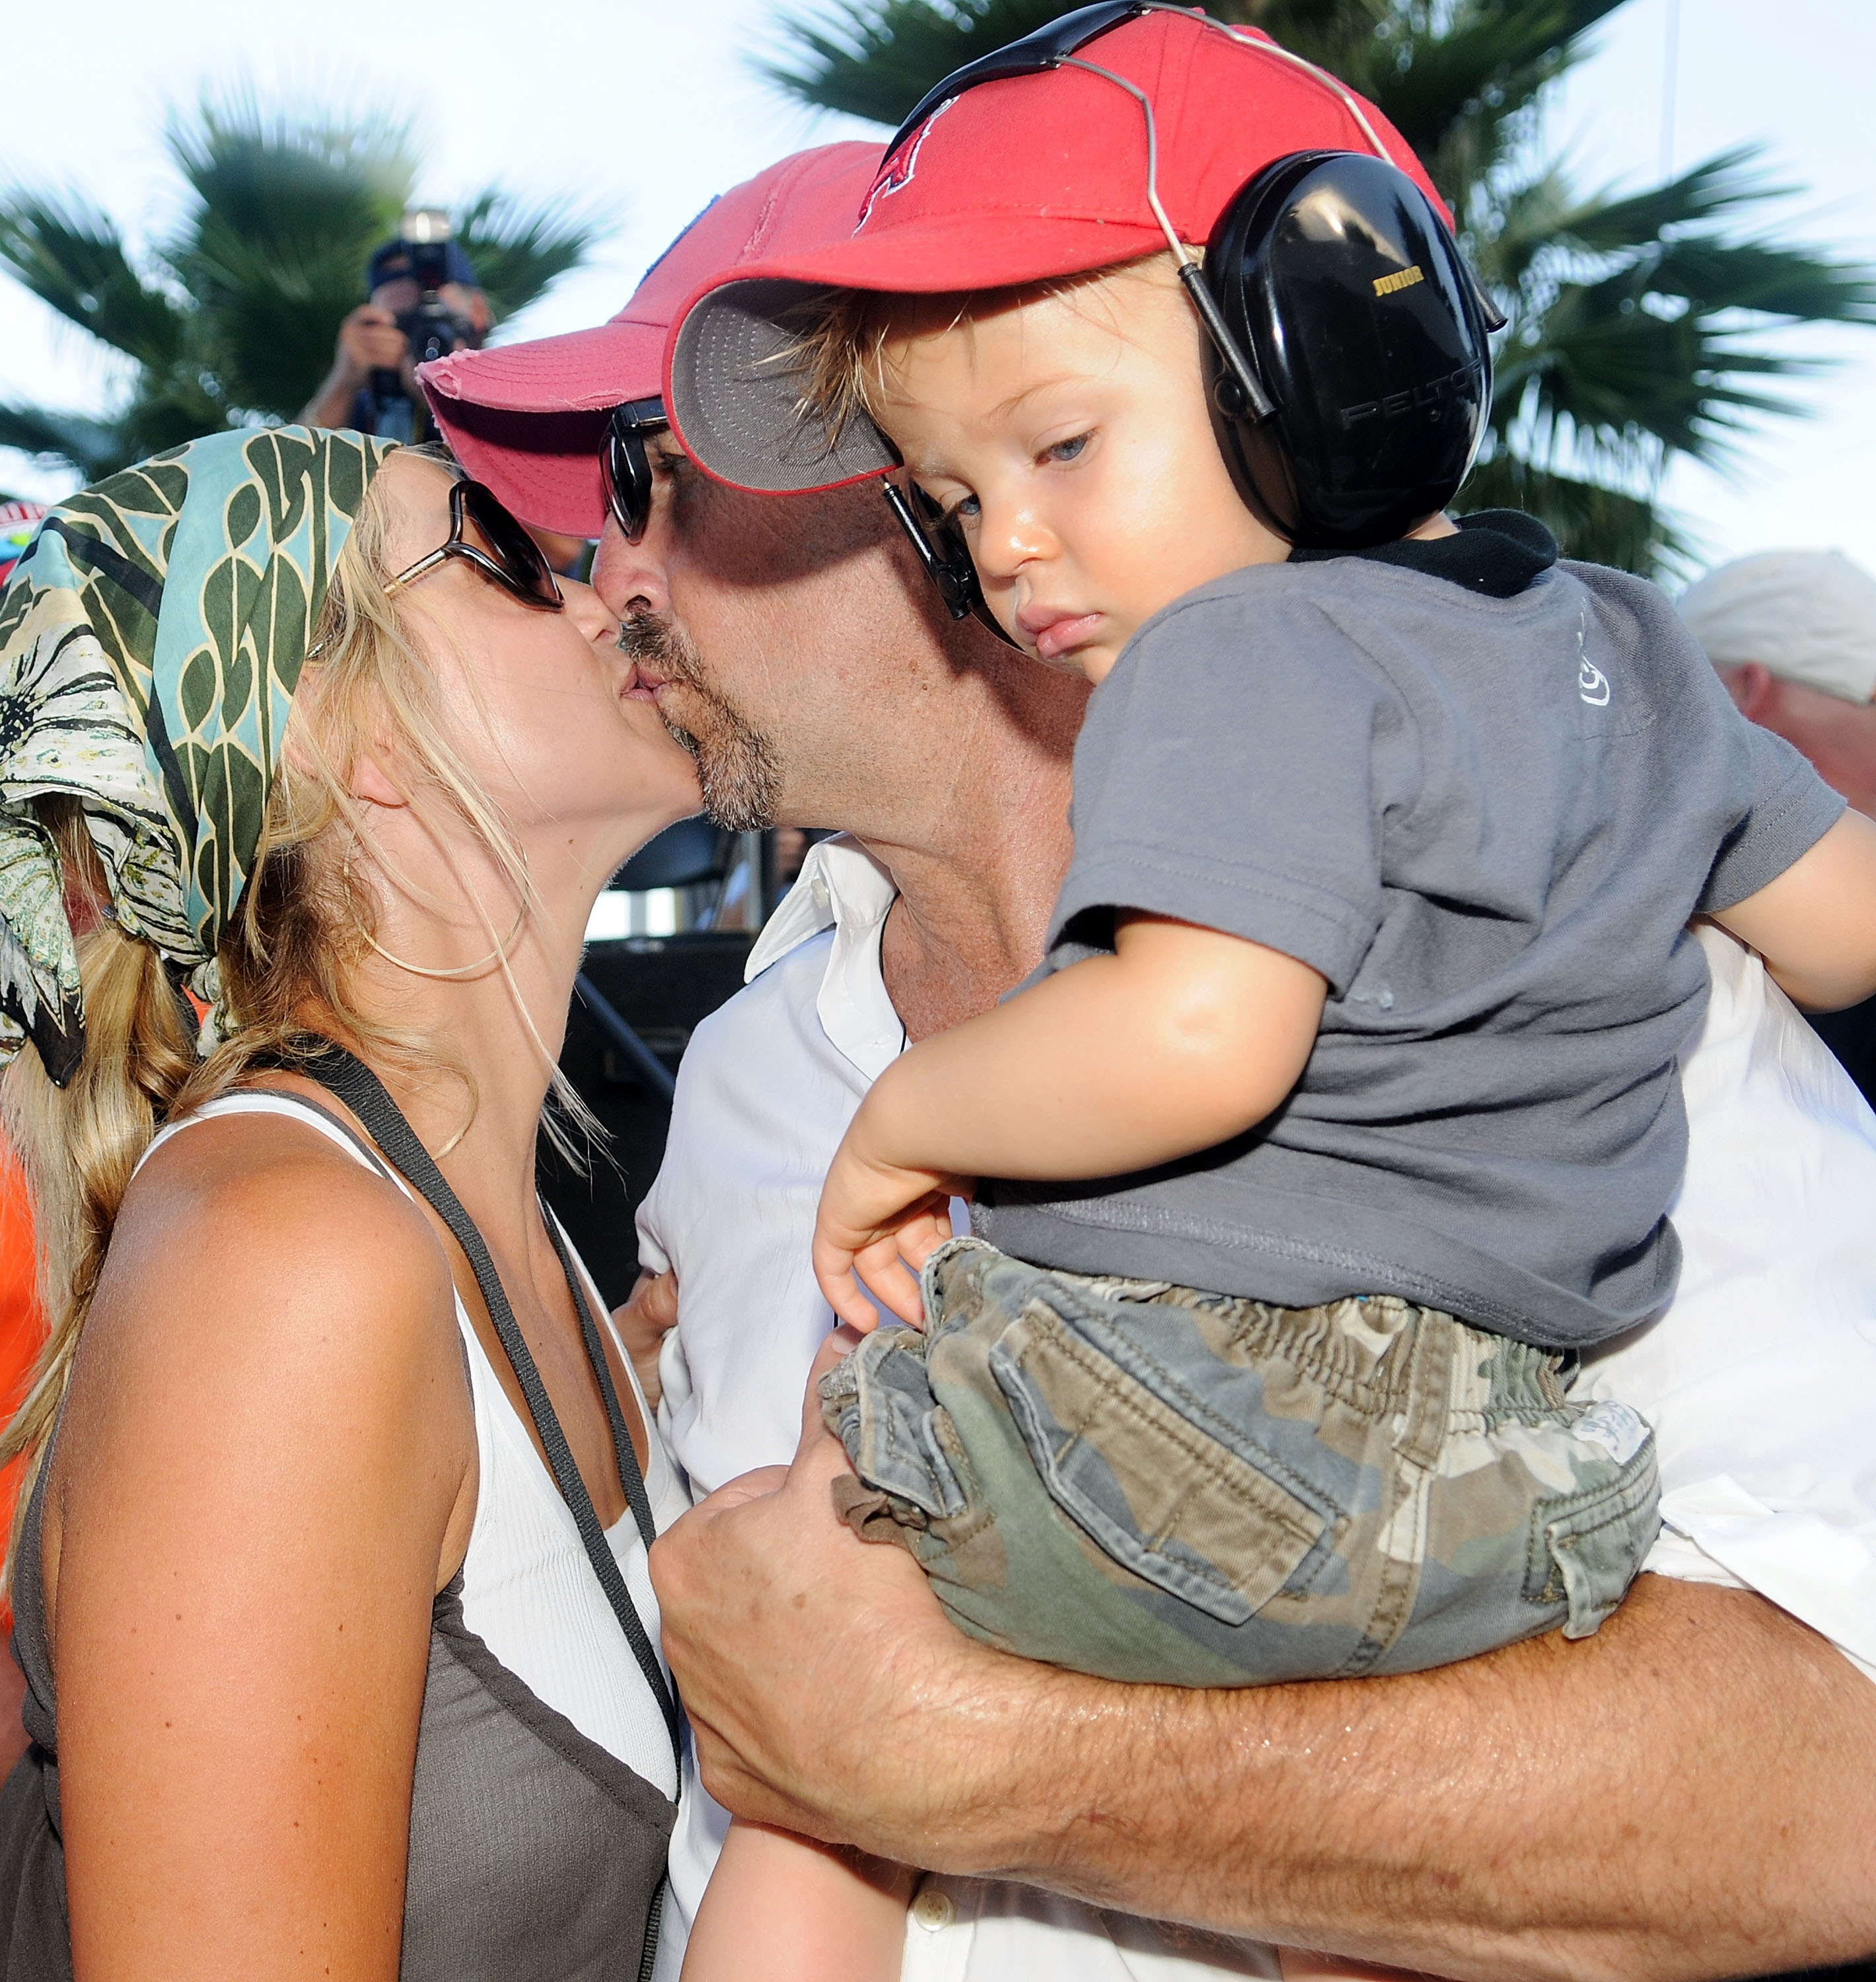 Kevin Costner kisses his wife Christine Baumgartner in the company of their son Cayden Costner during the Sprint Fan Zone before the NASCAR Sprint Cup Series Coke Zero 400 at Daytona International Speedway on July 5, 2008 in Daytona Beach, Florida. | Source: Getty Images